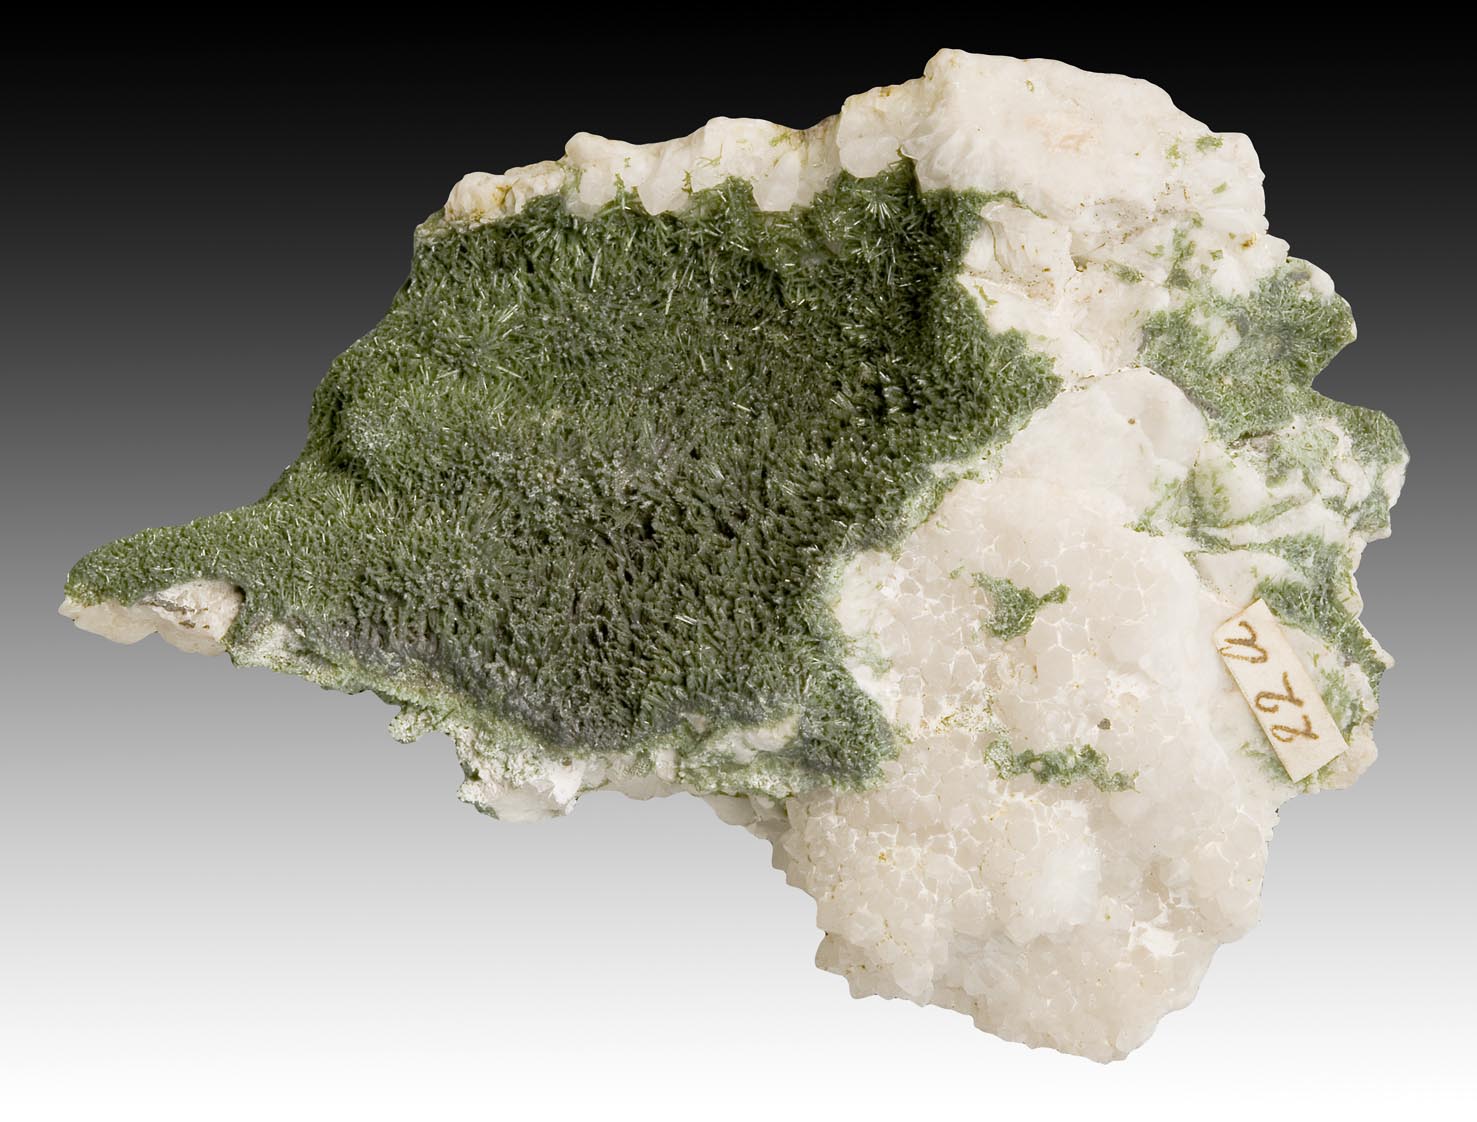 Olivenite on quartz from Cornwall, given to Henrietta by the Countess of Aylesford. Specimen 9 cm long. NMW 29.311.GR.80. 